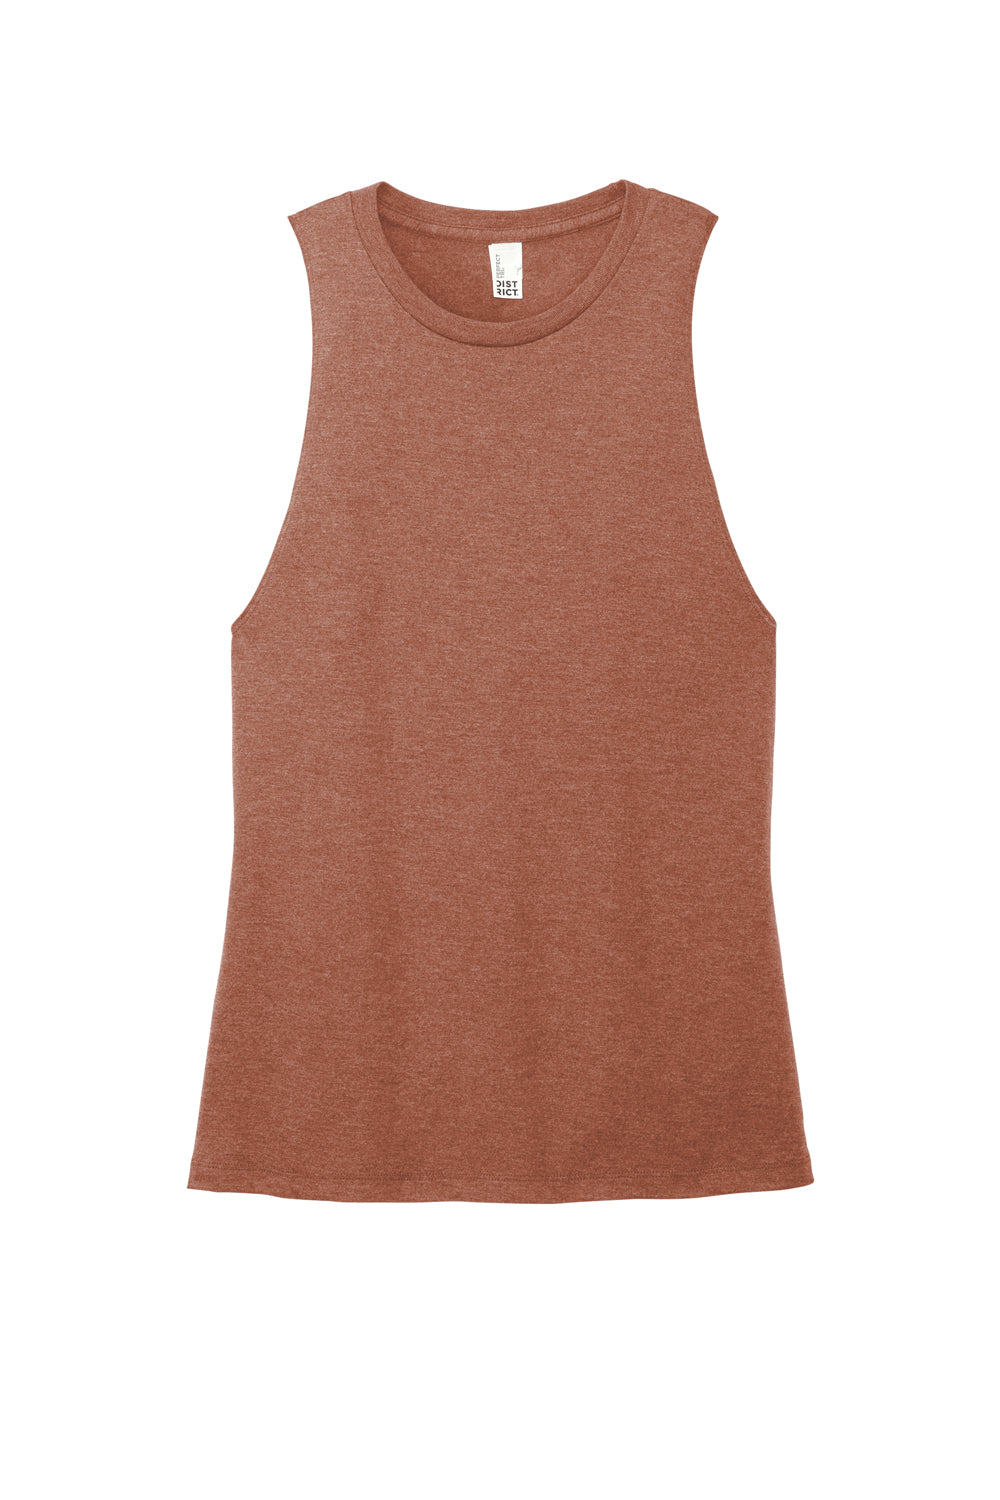 District DT153 Womens Perfect Tri Muscle Tank Top Heather Russet Red Flat Front